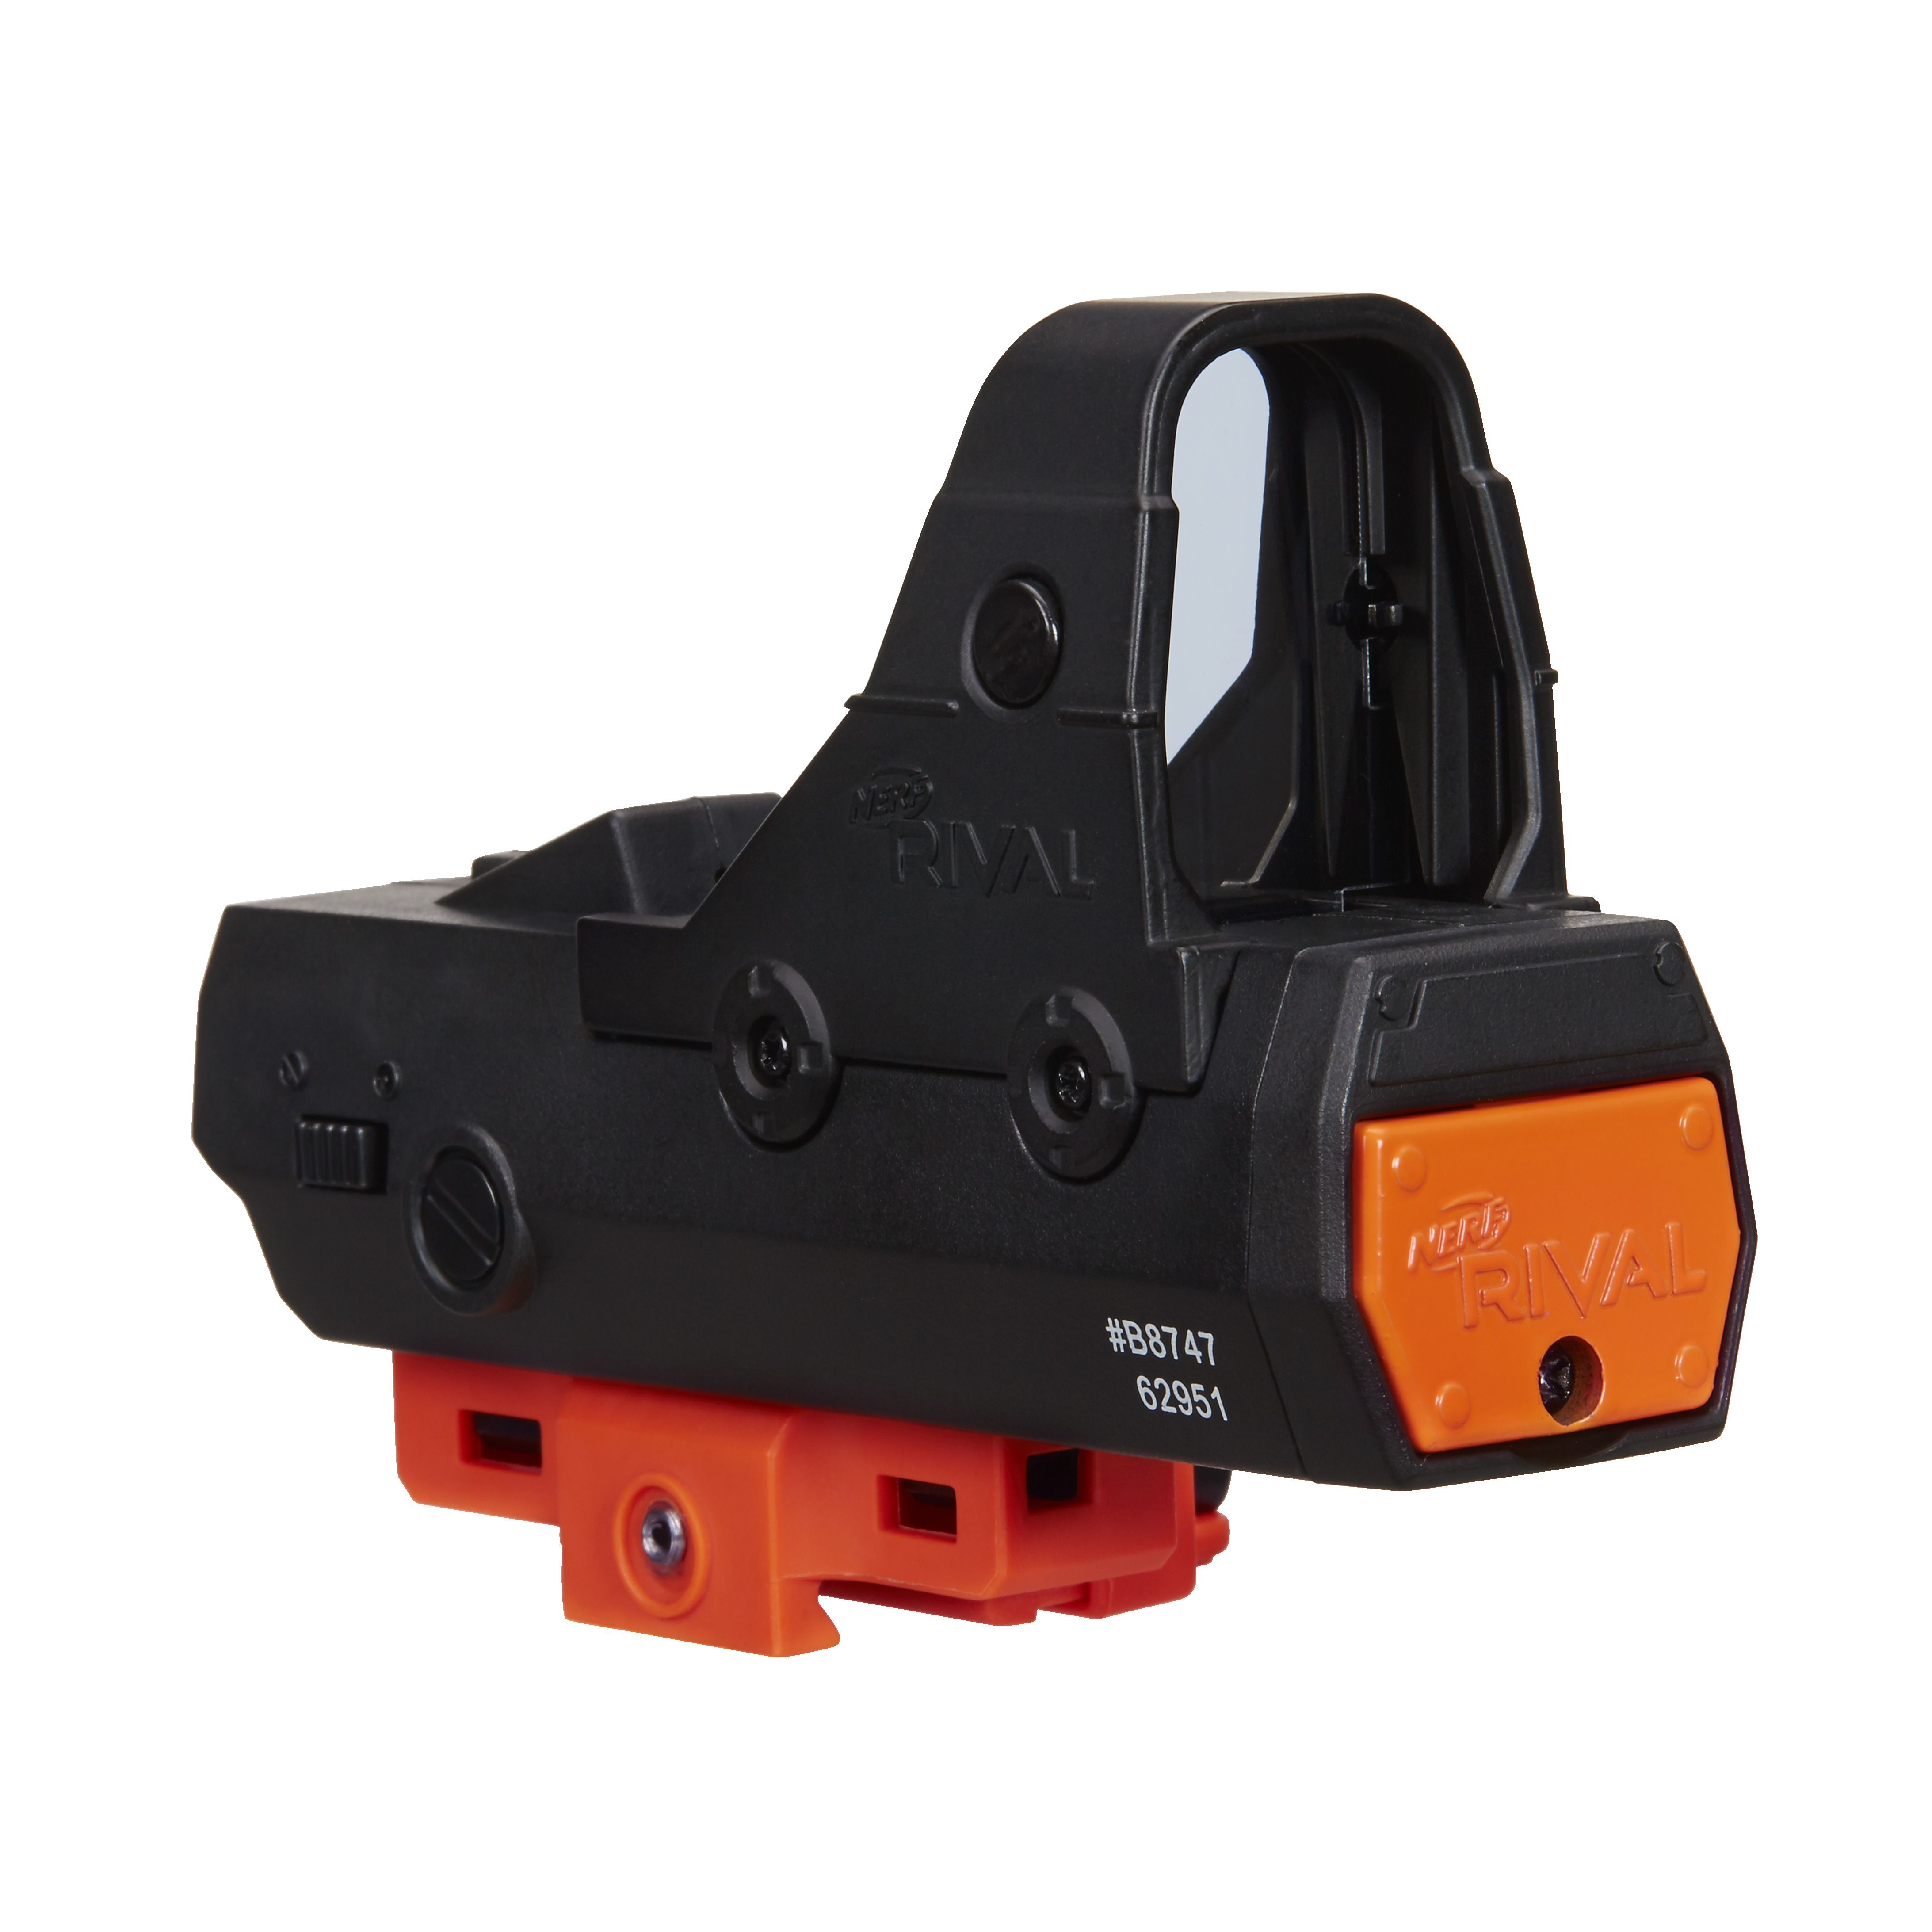 Red Dot Sight Scope Airsoft Nerf Blaster 